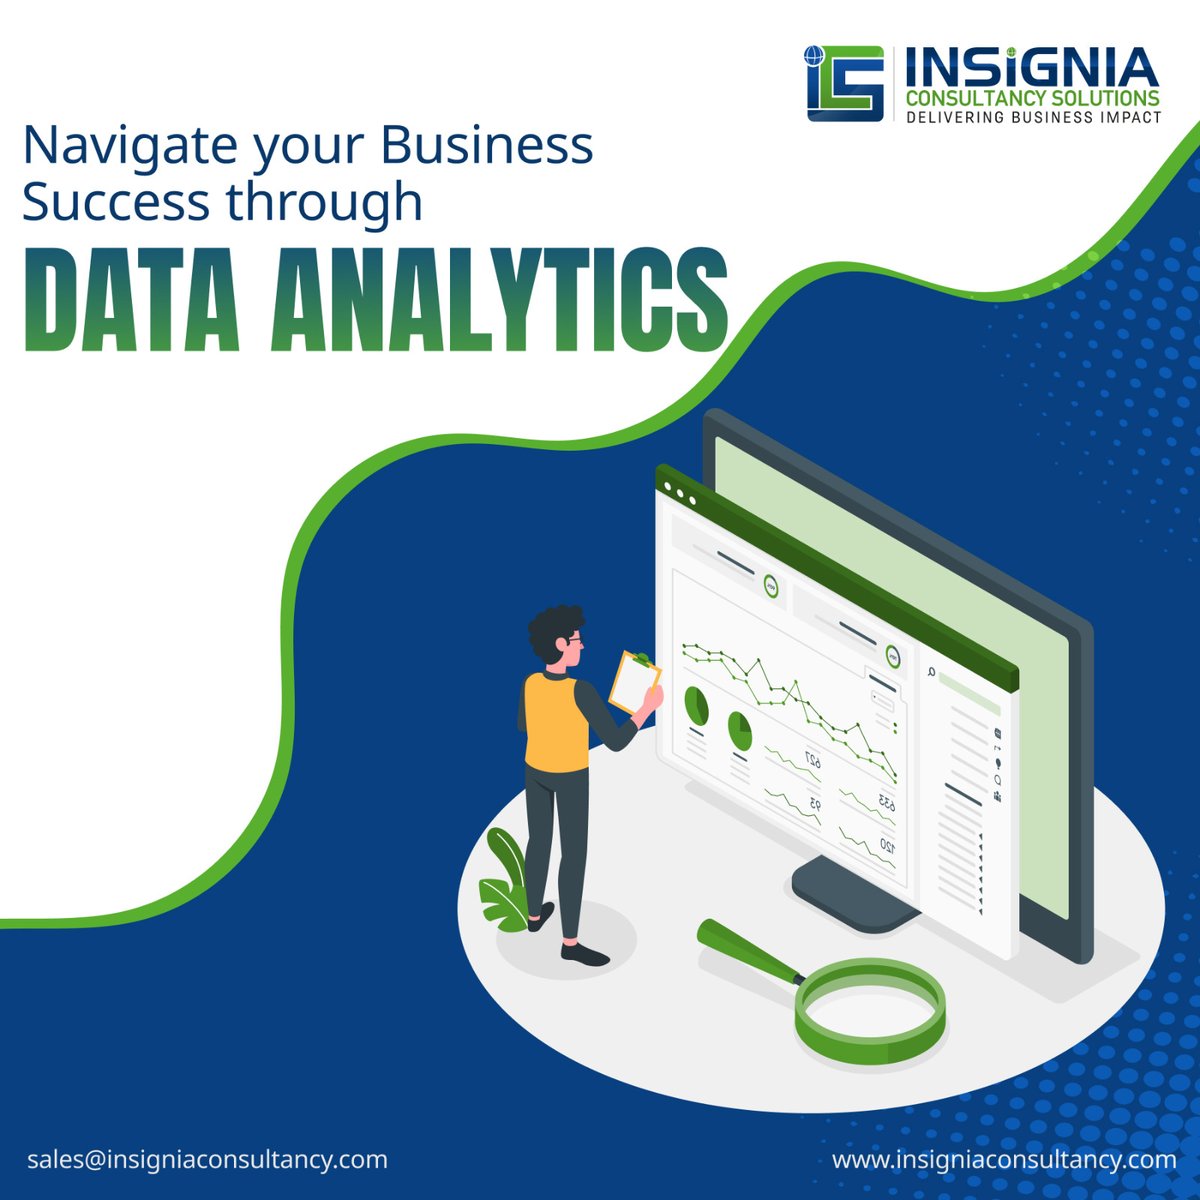 Elevate your business through Data Analytics, the cornerstone to unlocking insights and fueling growth. Our expertise shapes raw data into strategies of action. Let's empower your decisions collaboratively! Get in touch today.

#DataAnalytic #Data #Analytics #BusinessGrowth